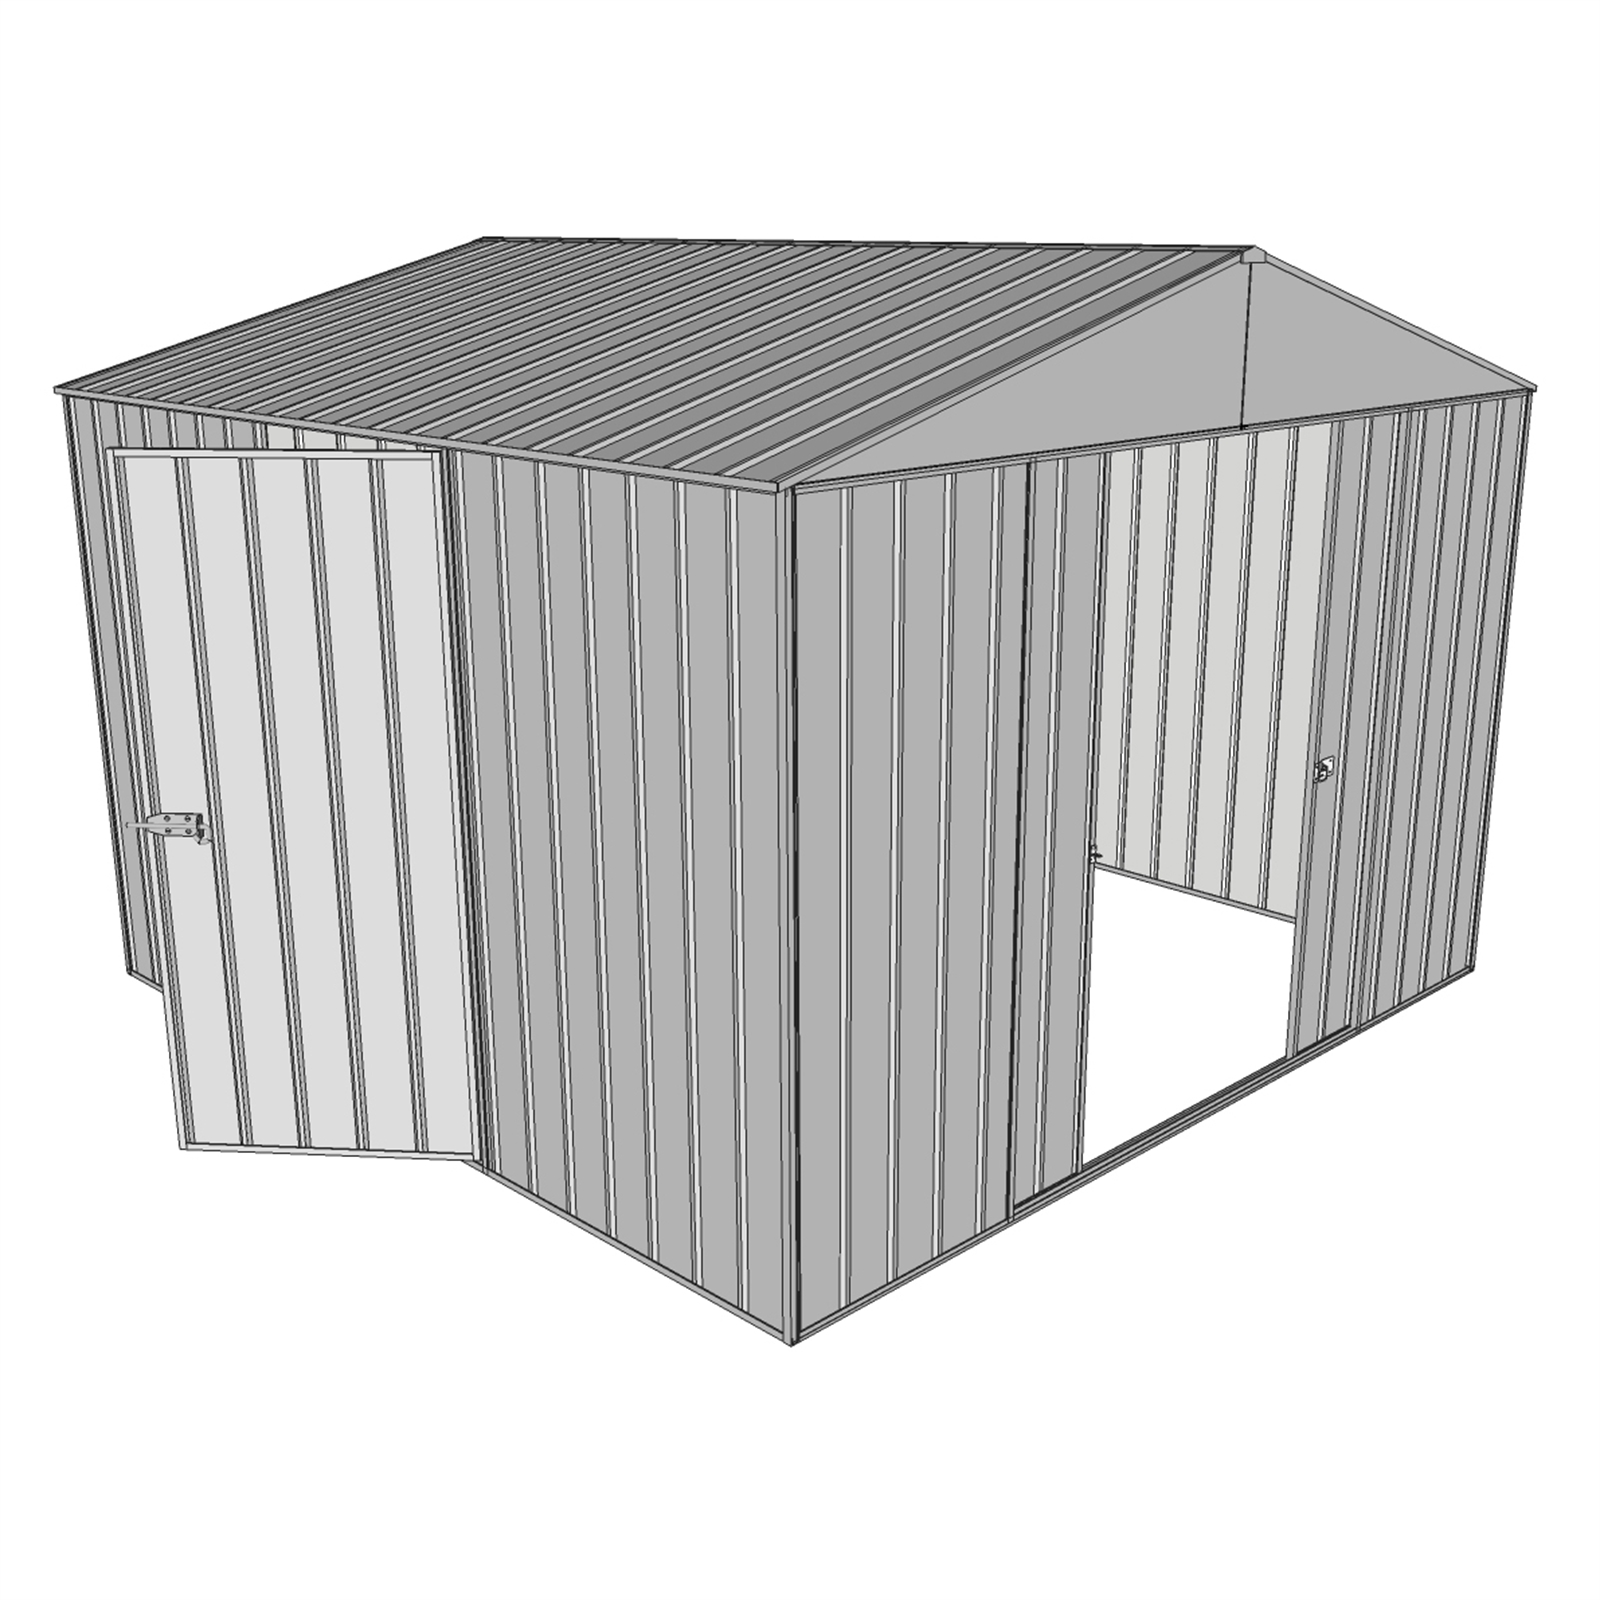 Build-a-Shed 3.0 x 2.3 x 3.0m Zinc Double Sliding and Single Hinge Door Shed